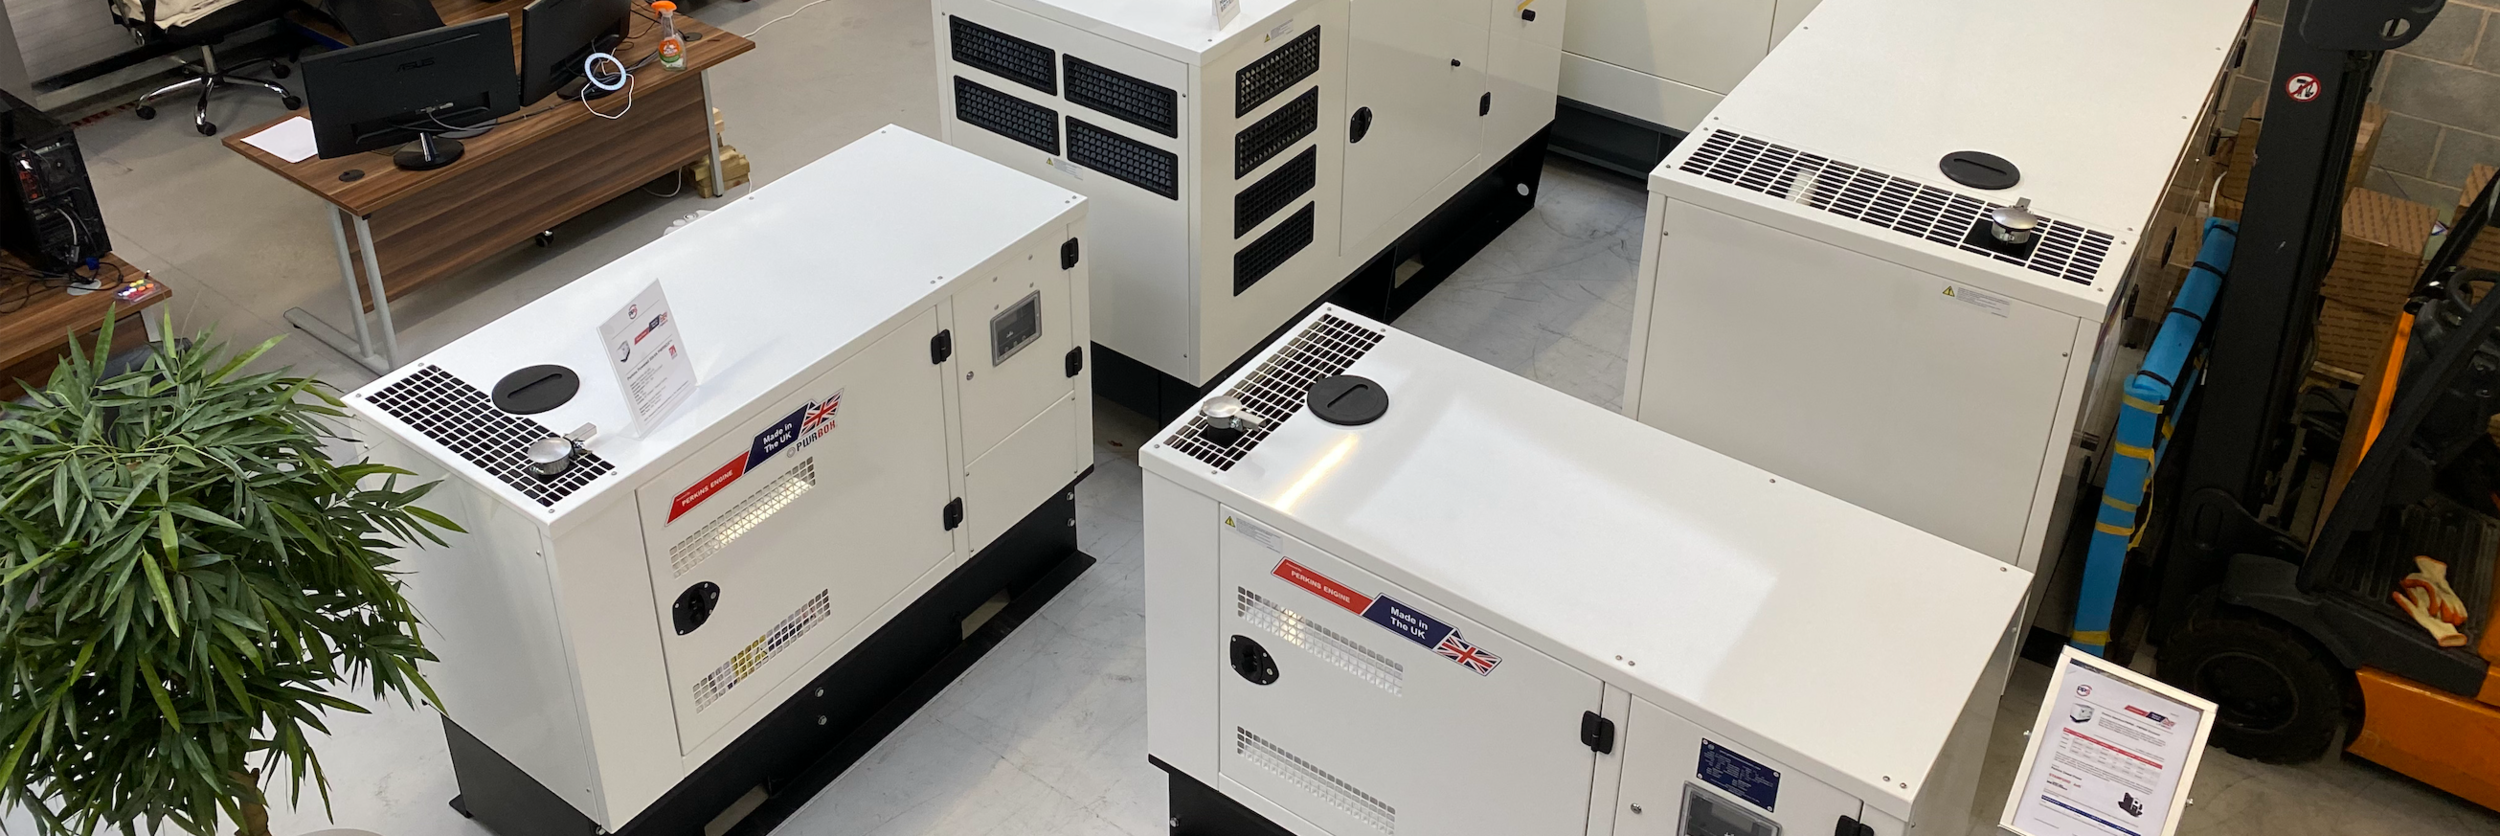 Used Generators For Sale In the UK 